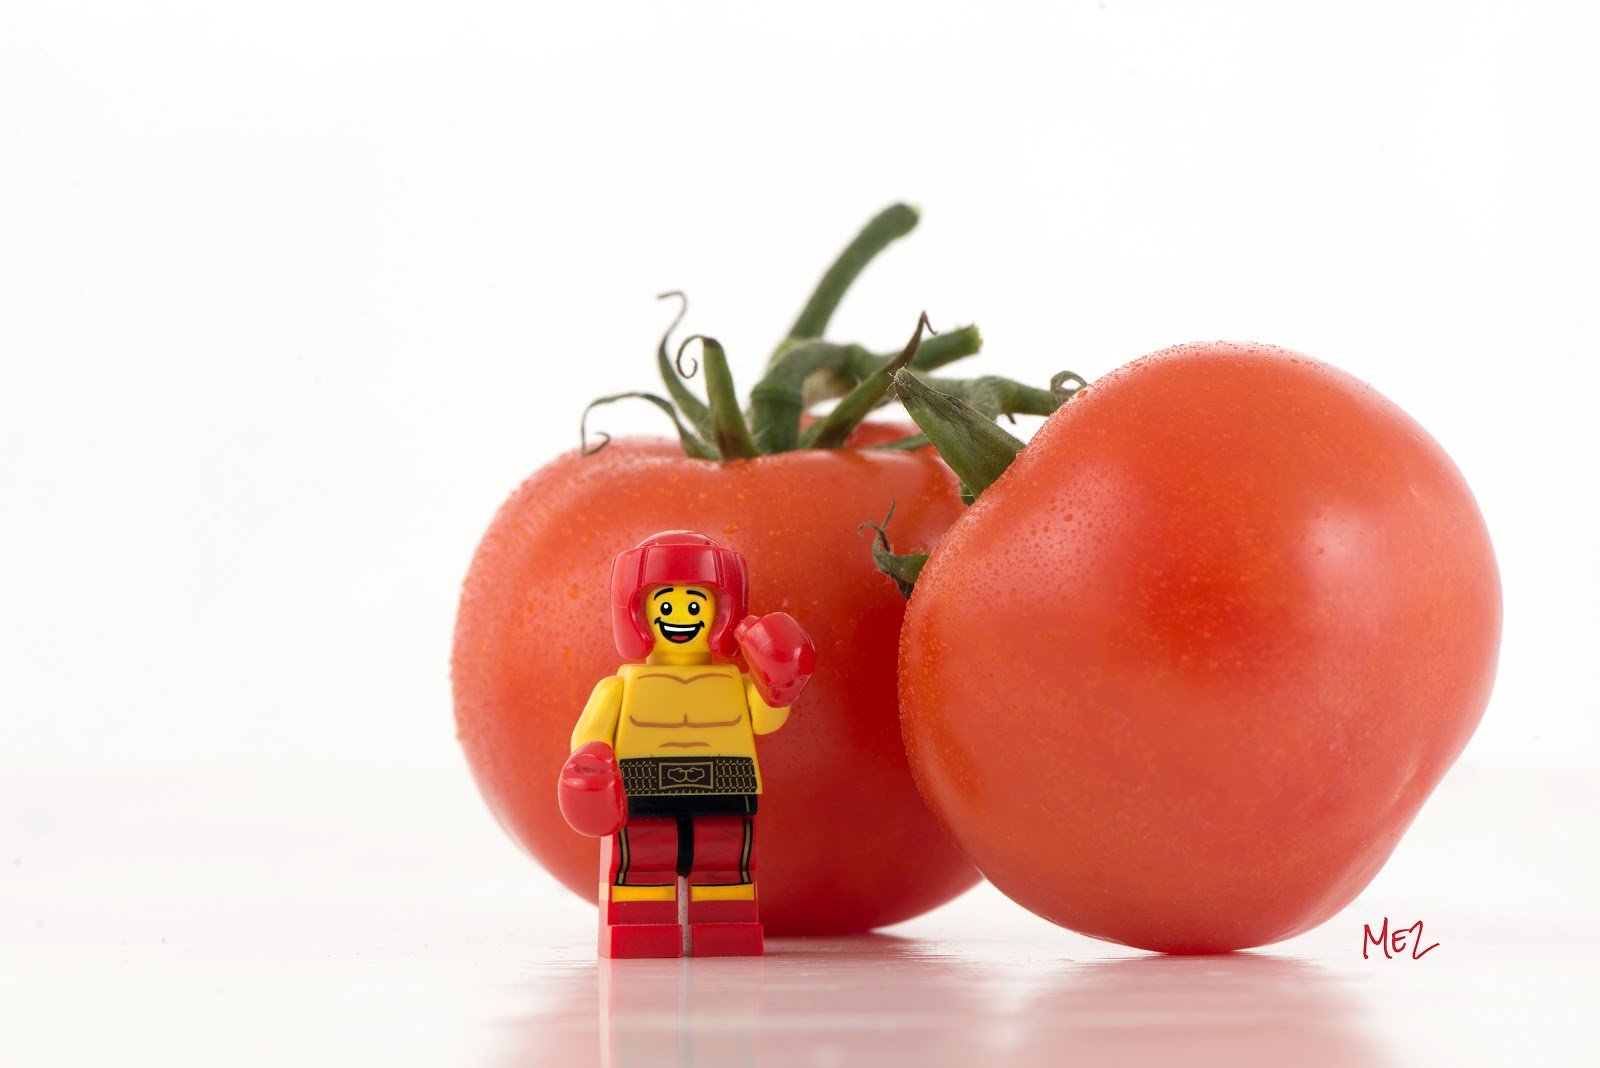 Are tomatoes a fruit or a vegetable? Either way they're part of a plant-based diet.